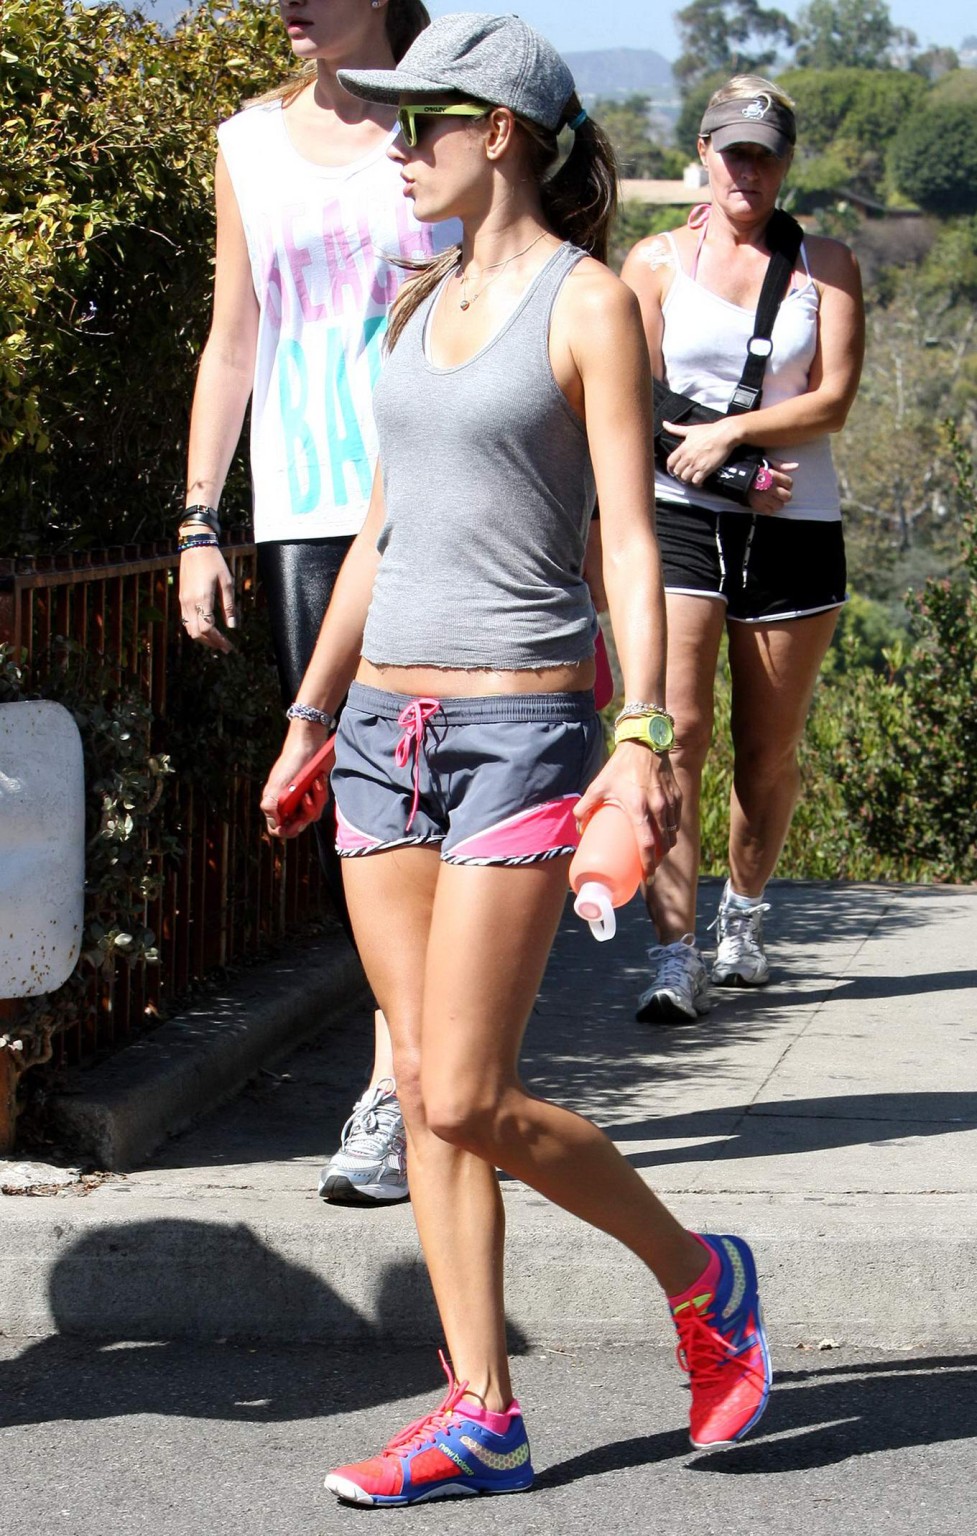 Alessandra Ambrosio and Ana Beatriz Barros stretching and hiking out in LA #75215761